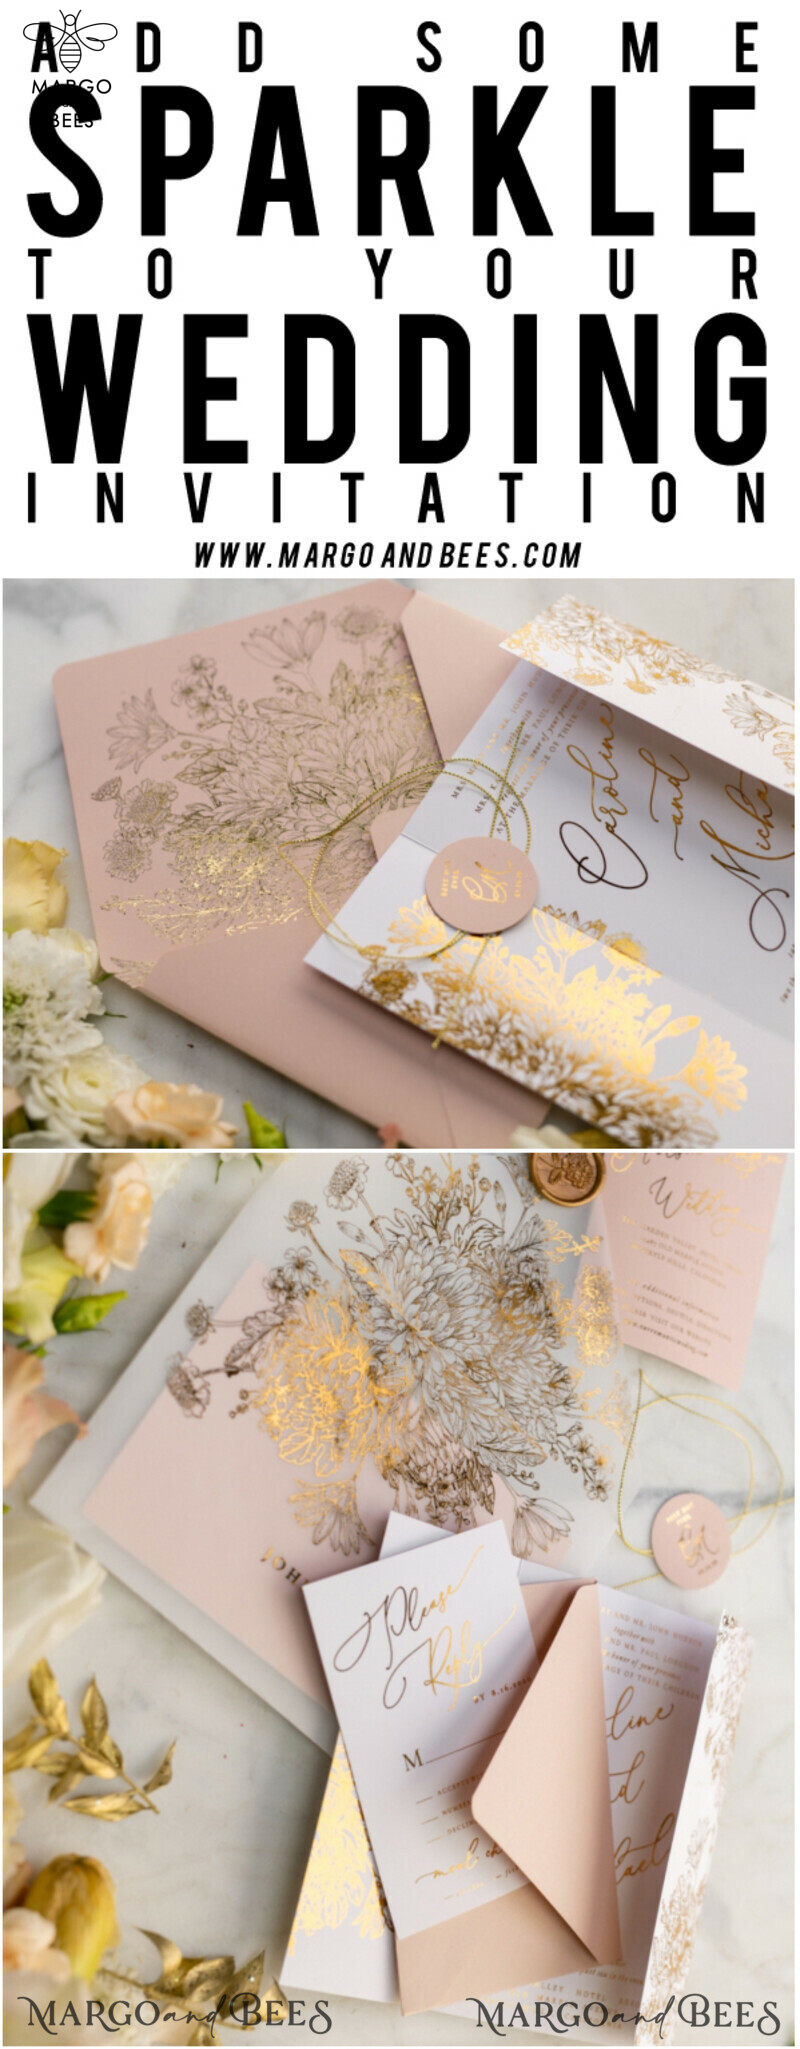 Elegant Arabic Golden Wedding Invitations with Glamour Gold Foil and Romantic Blush Pink, Exquisite Bespoke Indian Wedding Stationery-41